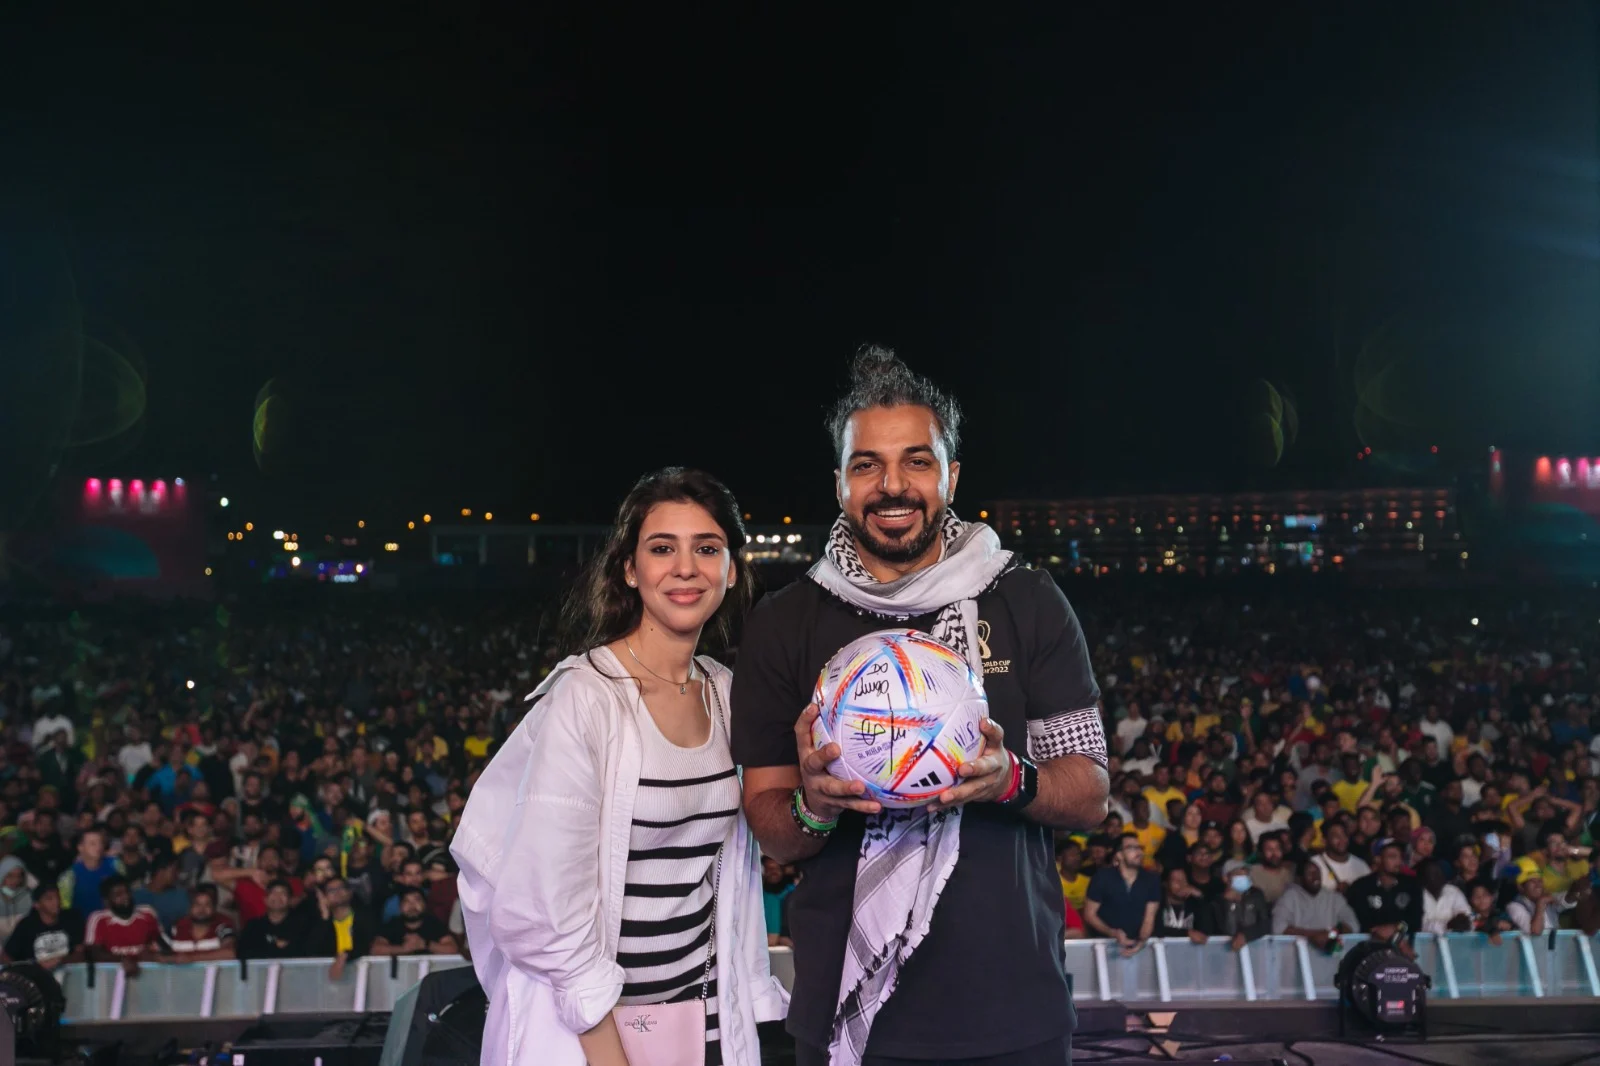 FIFA Fan Festival Receives Over One Million Visitors